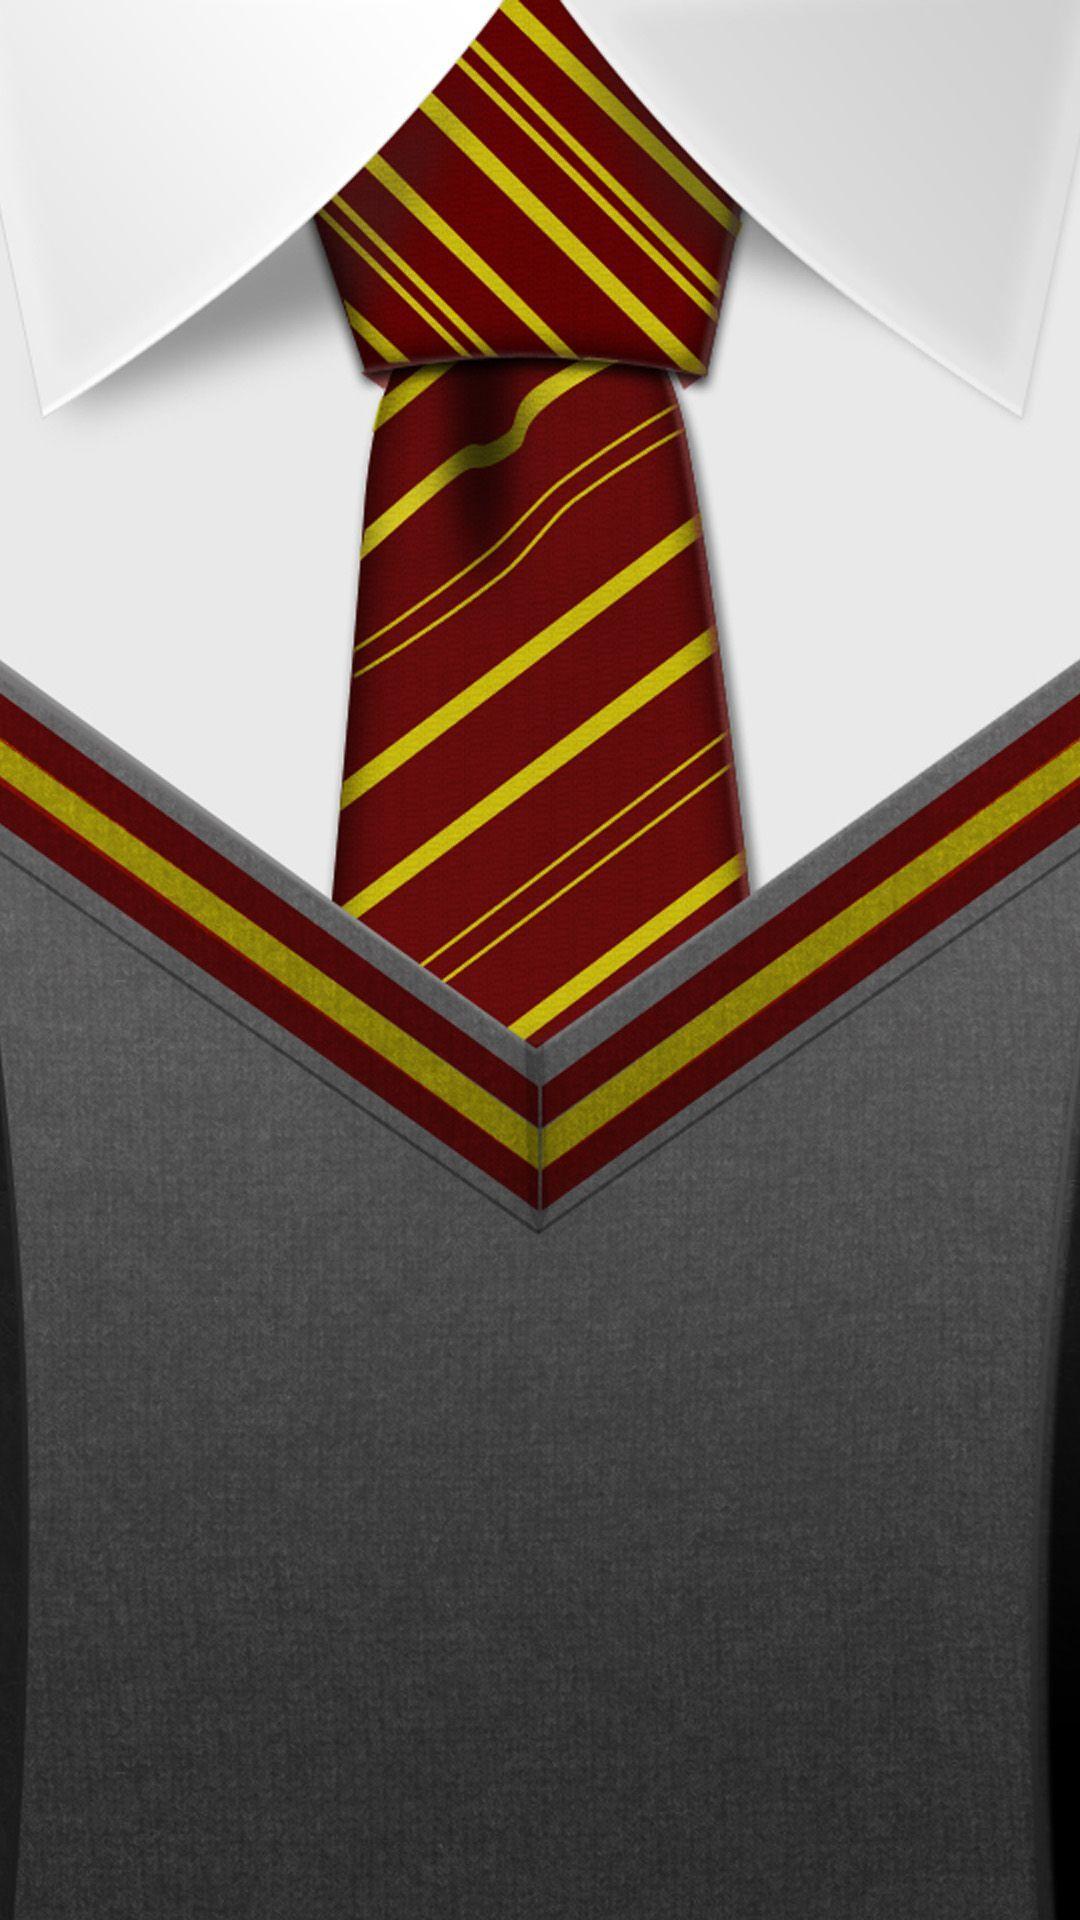 Harry Potter Gryffindor Tie to see more amazing Harry Potter